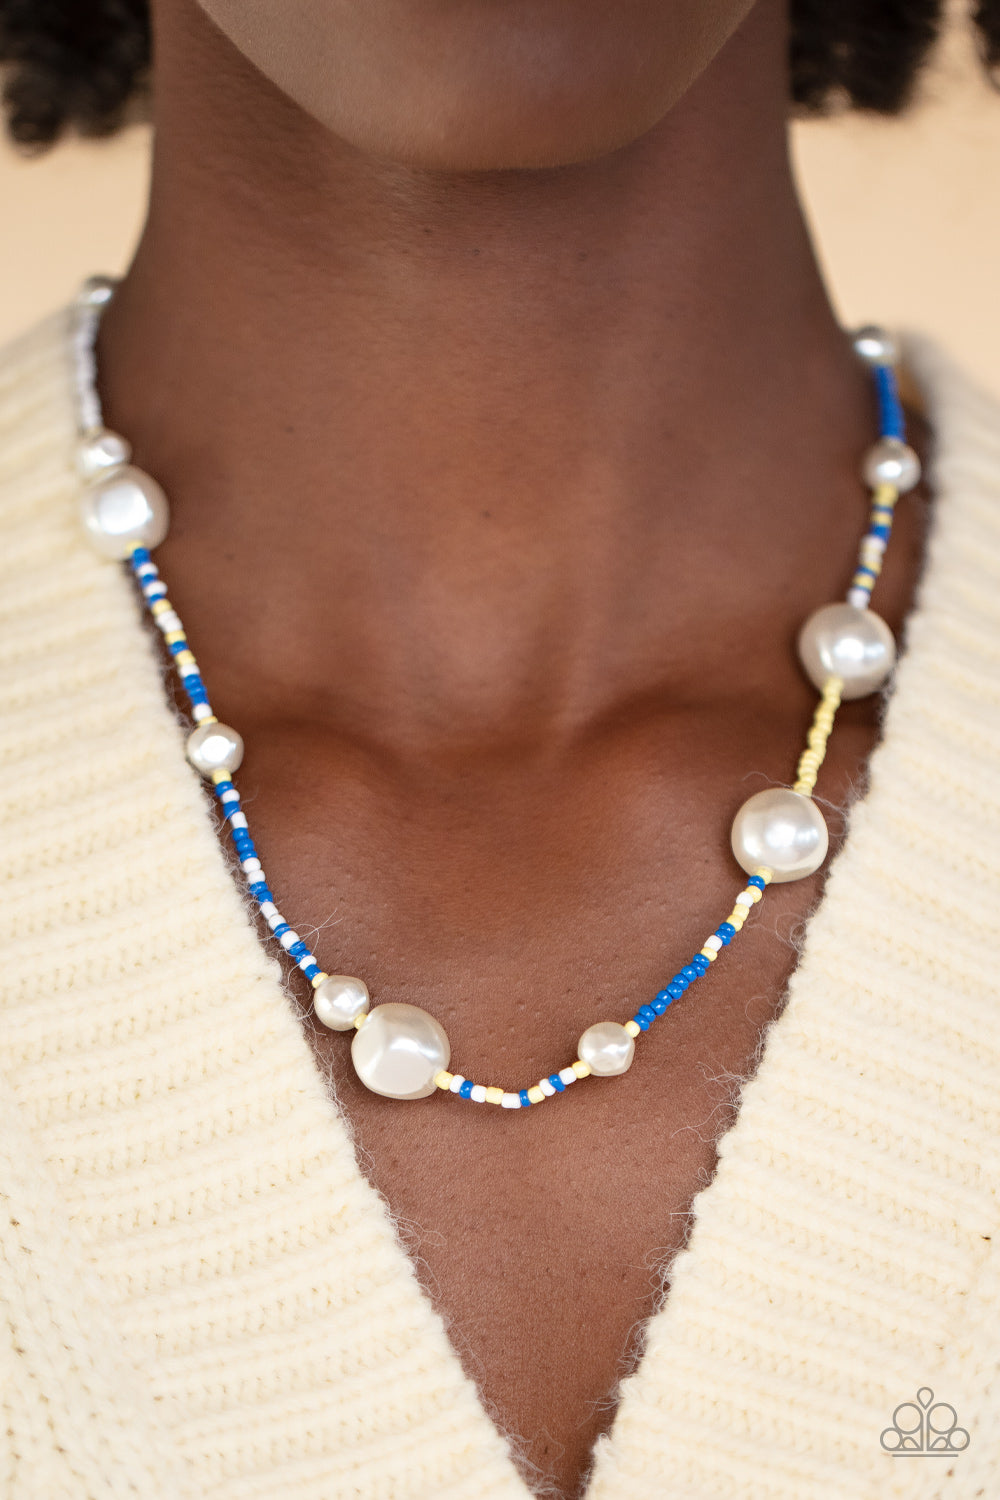 Modern Marina Paparazzi Accessories Necklace with Earrings Blue